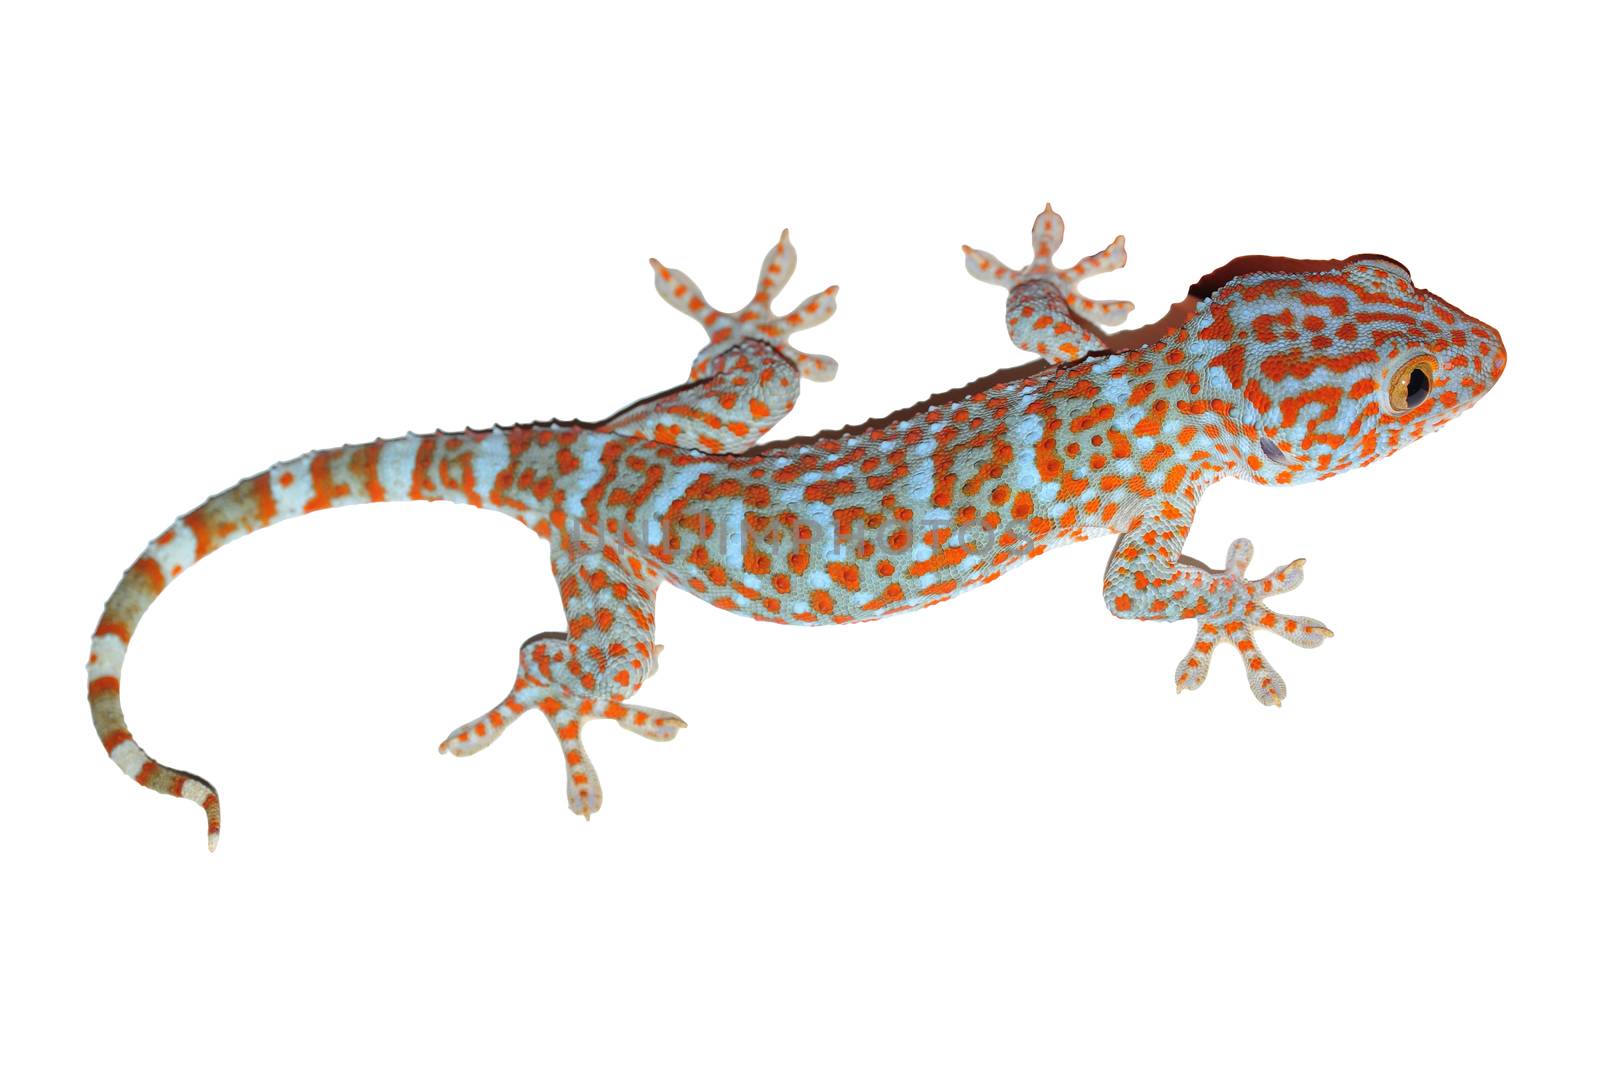 gecko isolated on white with clipping path by antpkr